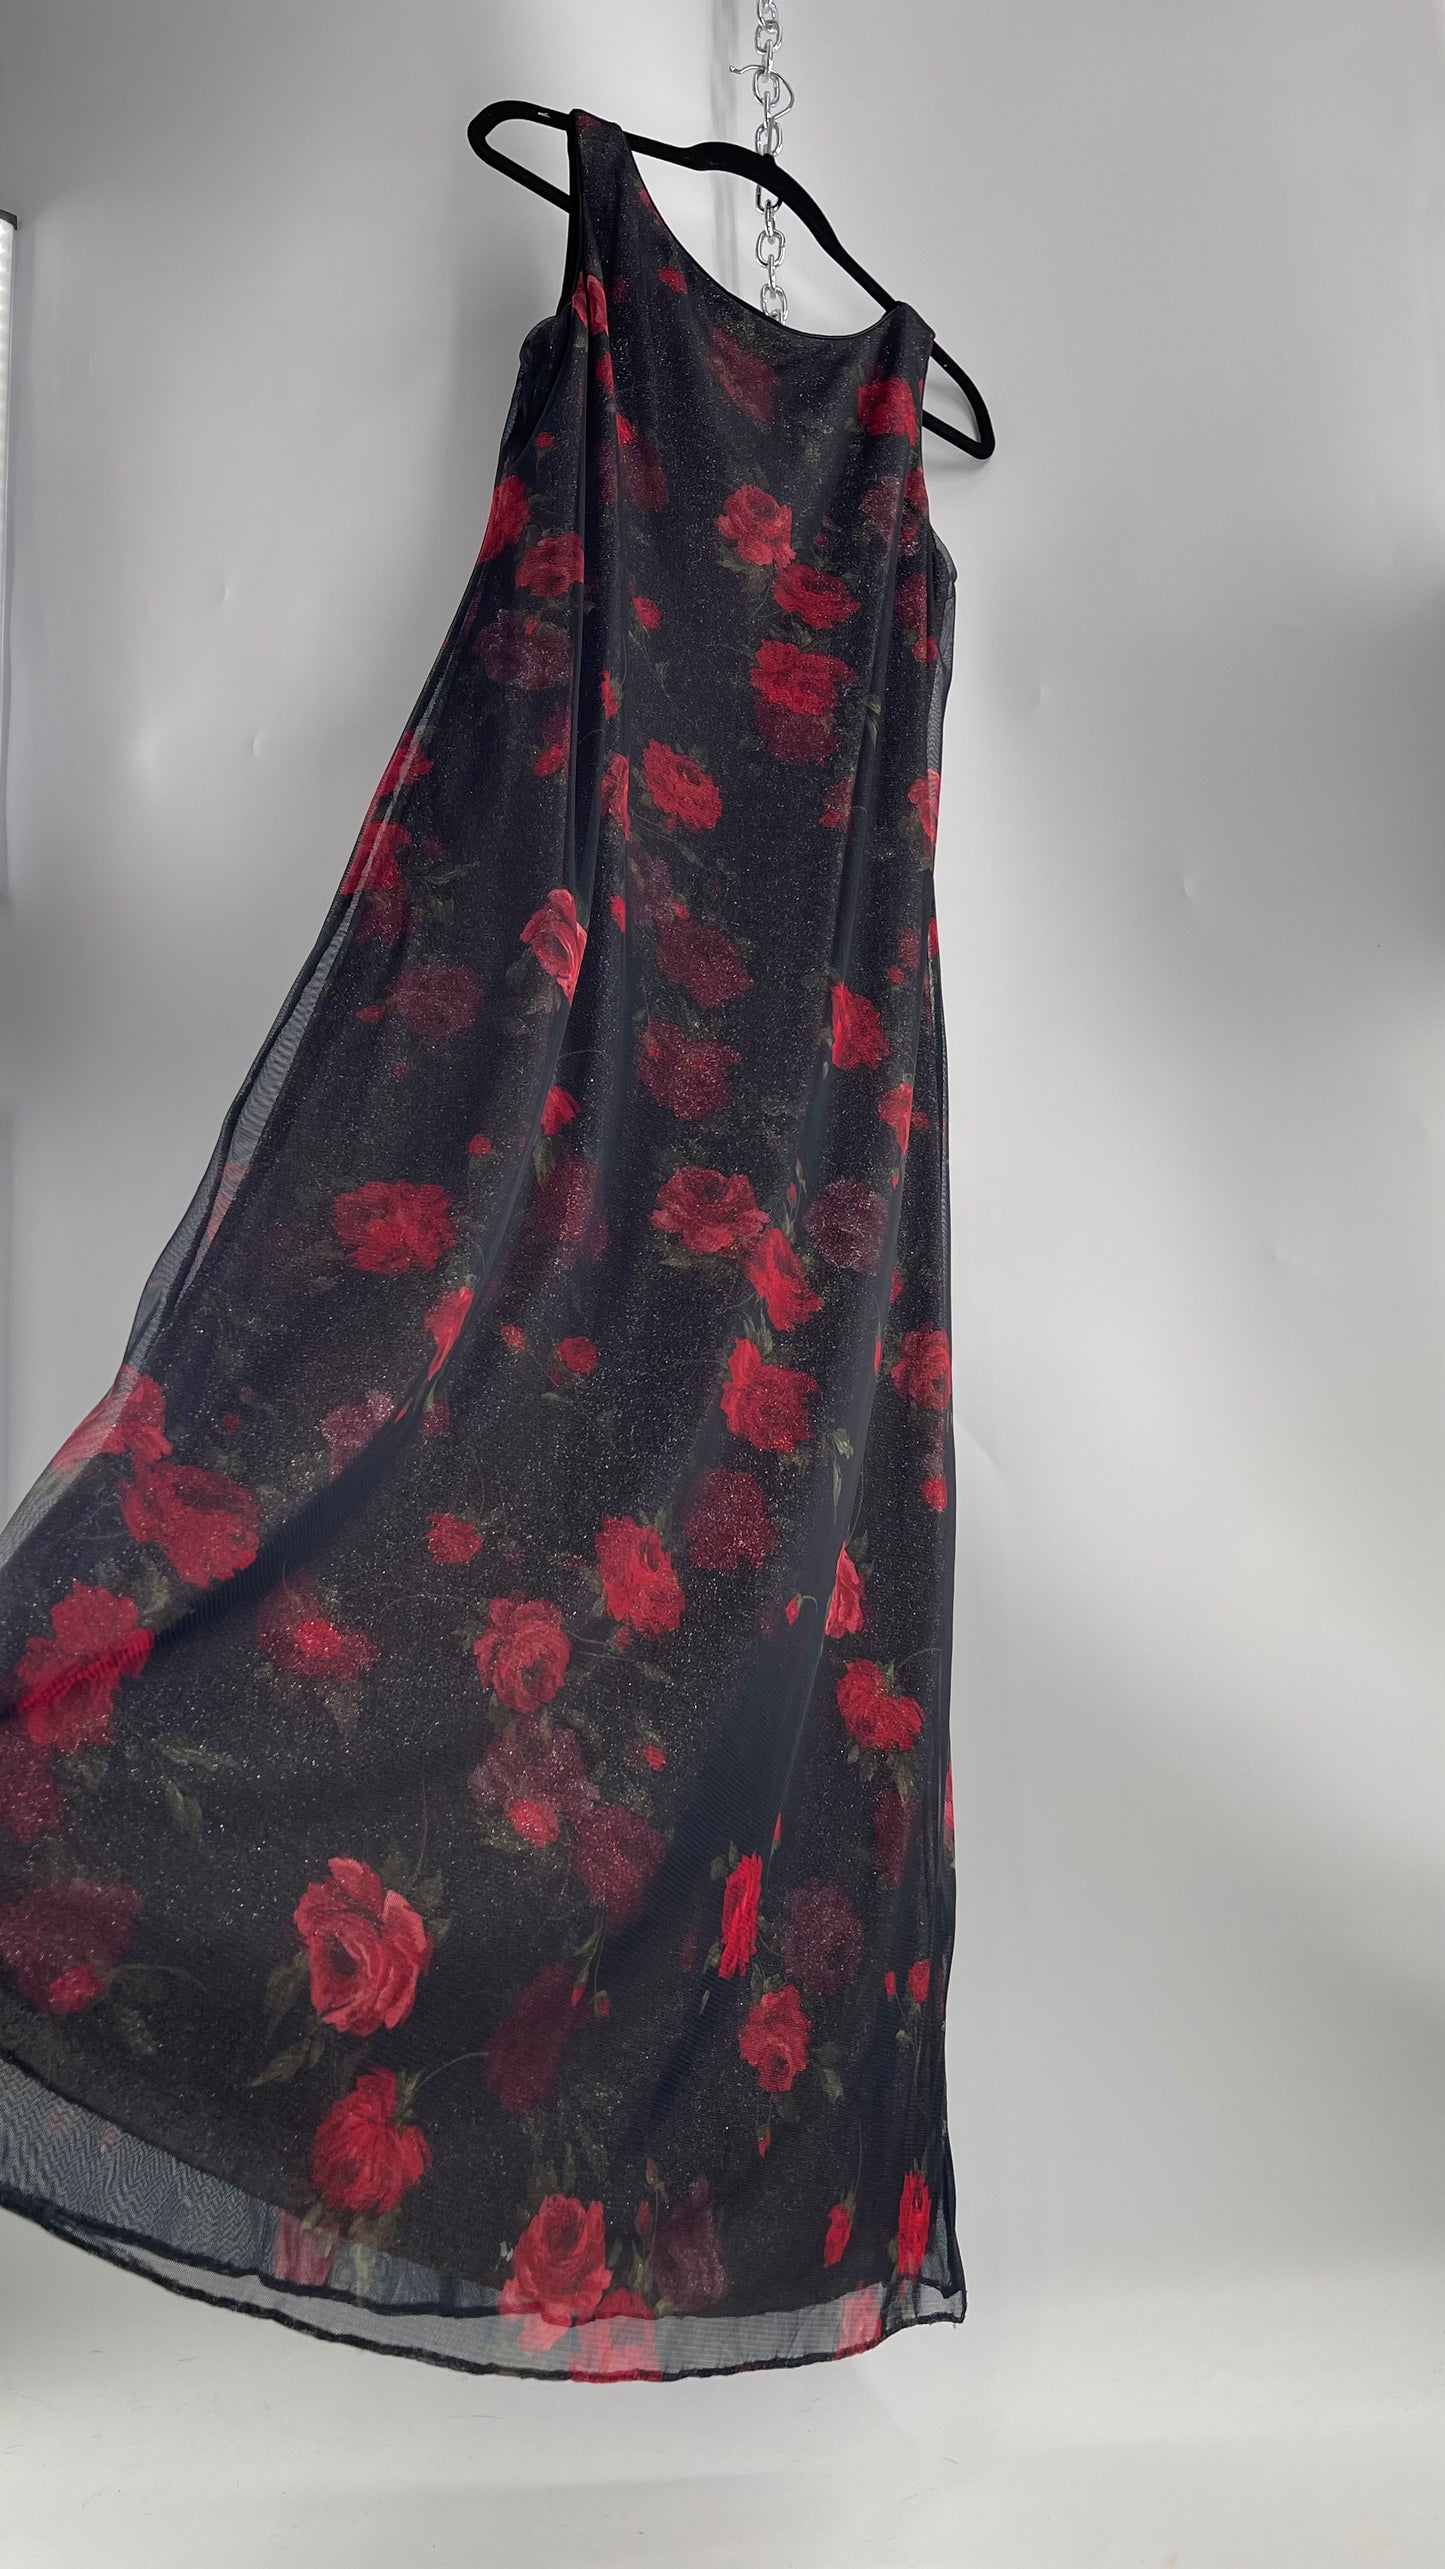 Vintage TEDDI EVENING Dress with Red Rose Layer Over Glitter Graphic and Black Base Layer (10)